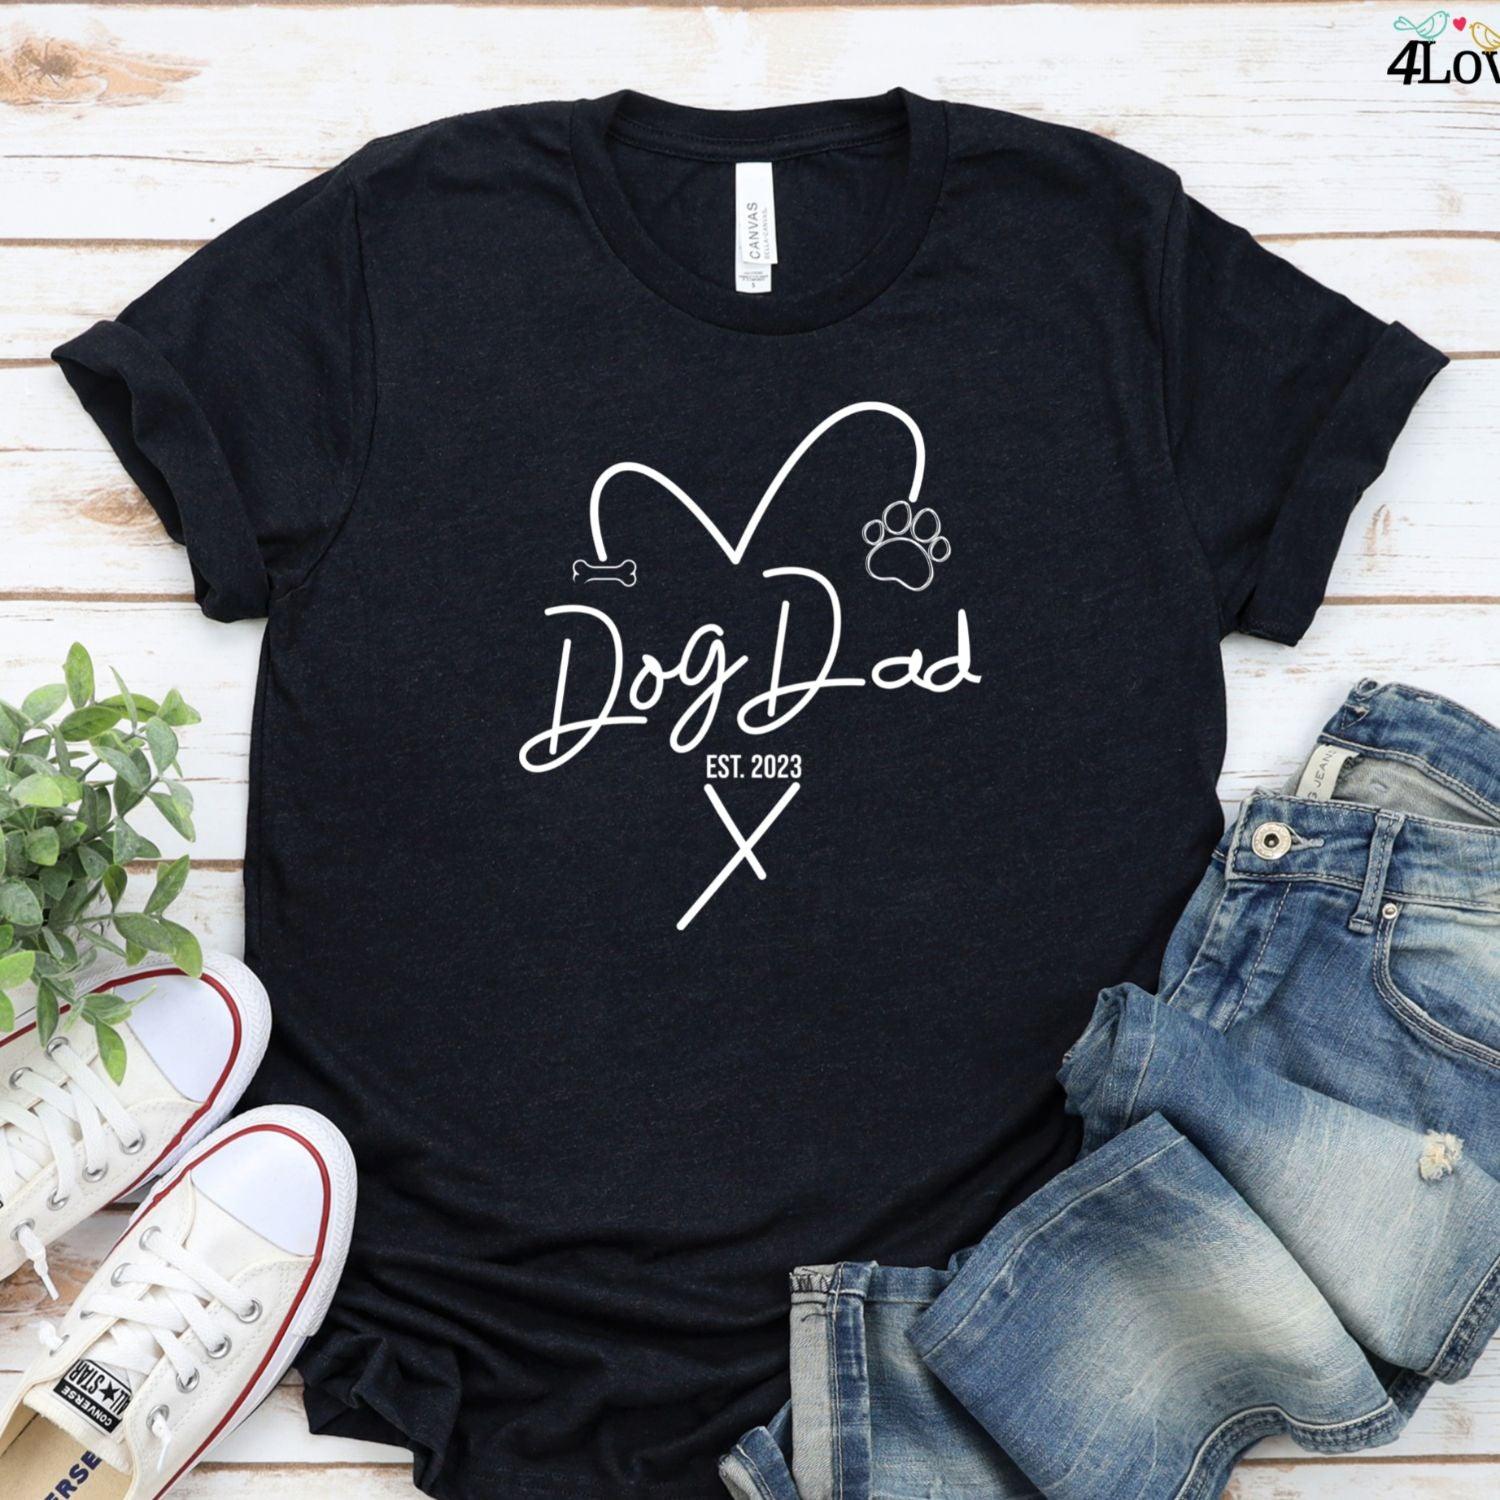 Dog Parents Custom Matching Outfits - Personalized EST Year, Stylish Duo Set for Dog Moms & Dads - 4Lovebirds